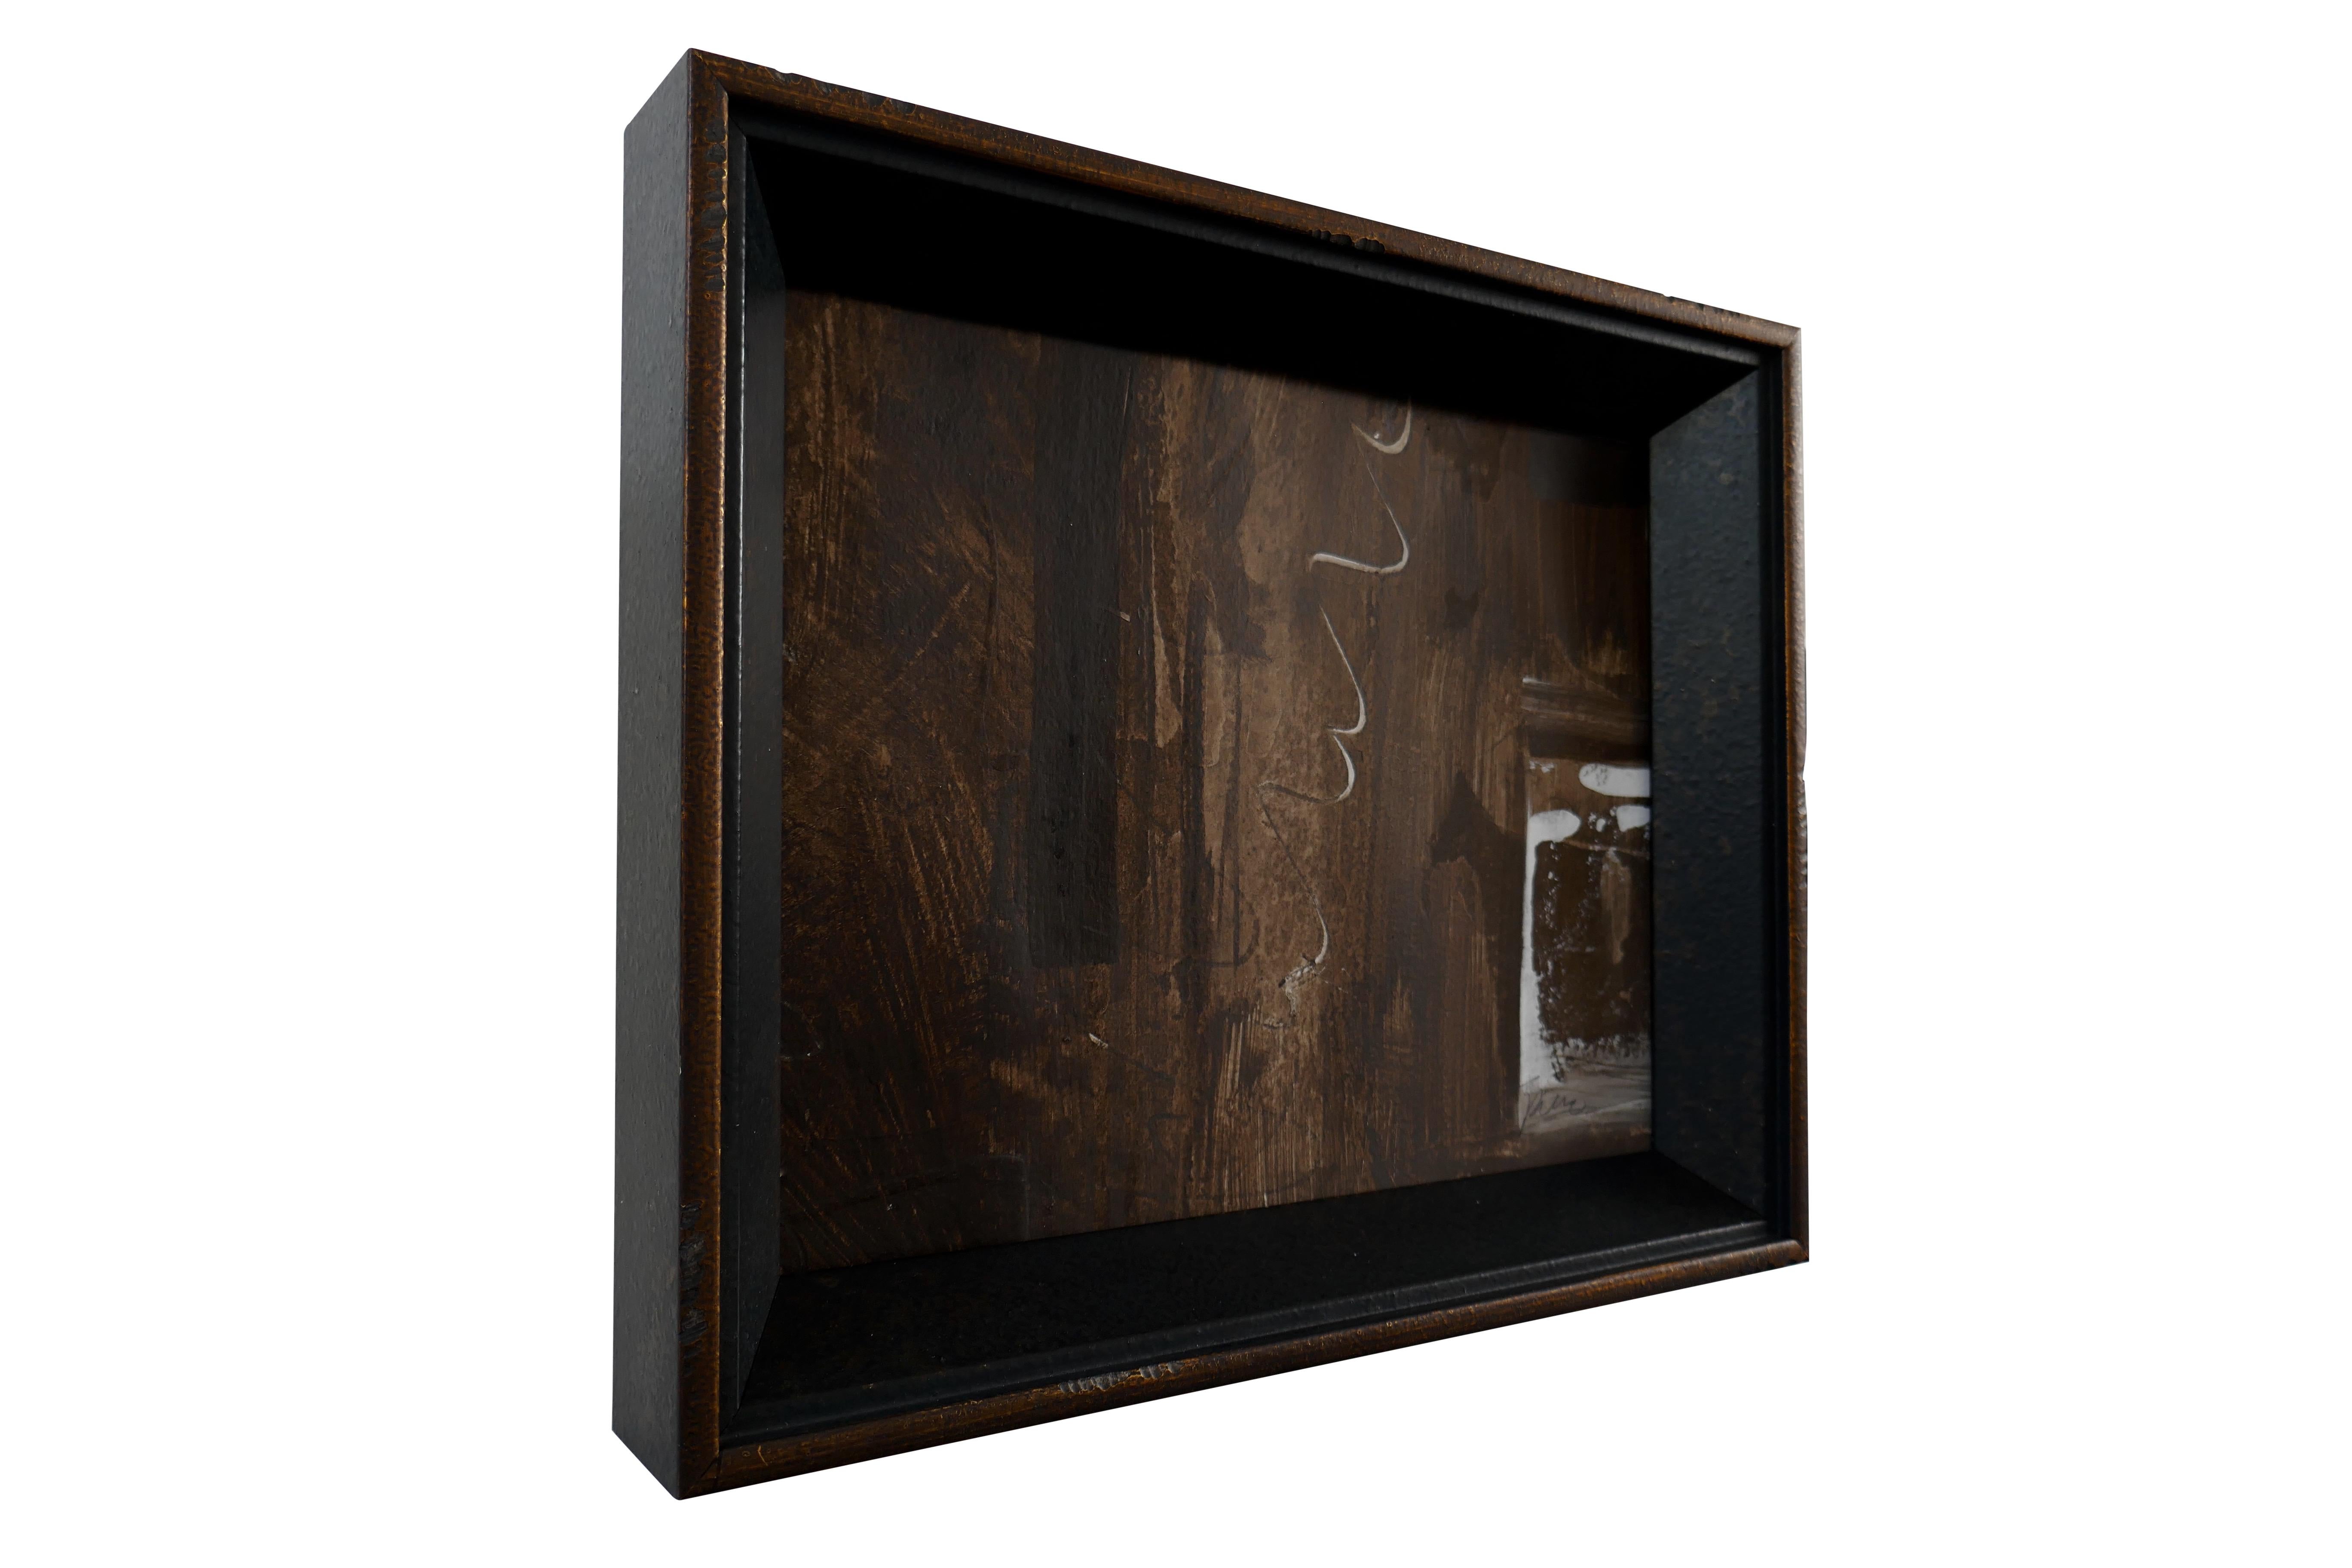 FI Gallery original one-of-one hand created & signed art piece by Tammy Price. Premium solid wood glass encased frame in matte black with gold accent. Multi shades predominantly of earthy terrain brown's. Mediums of acrylic, ink and charcoal. Comes